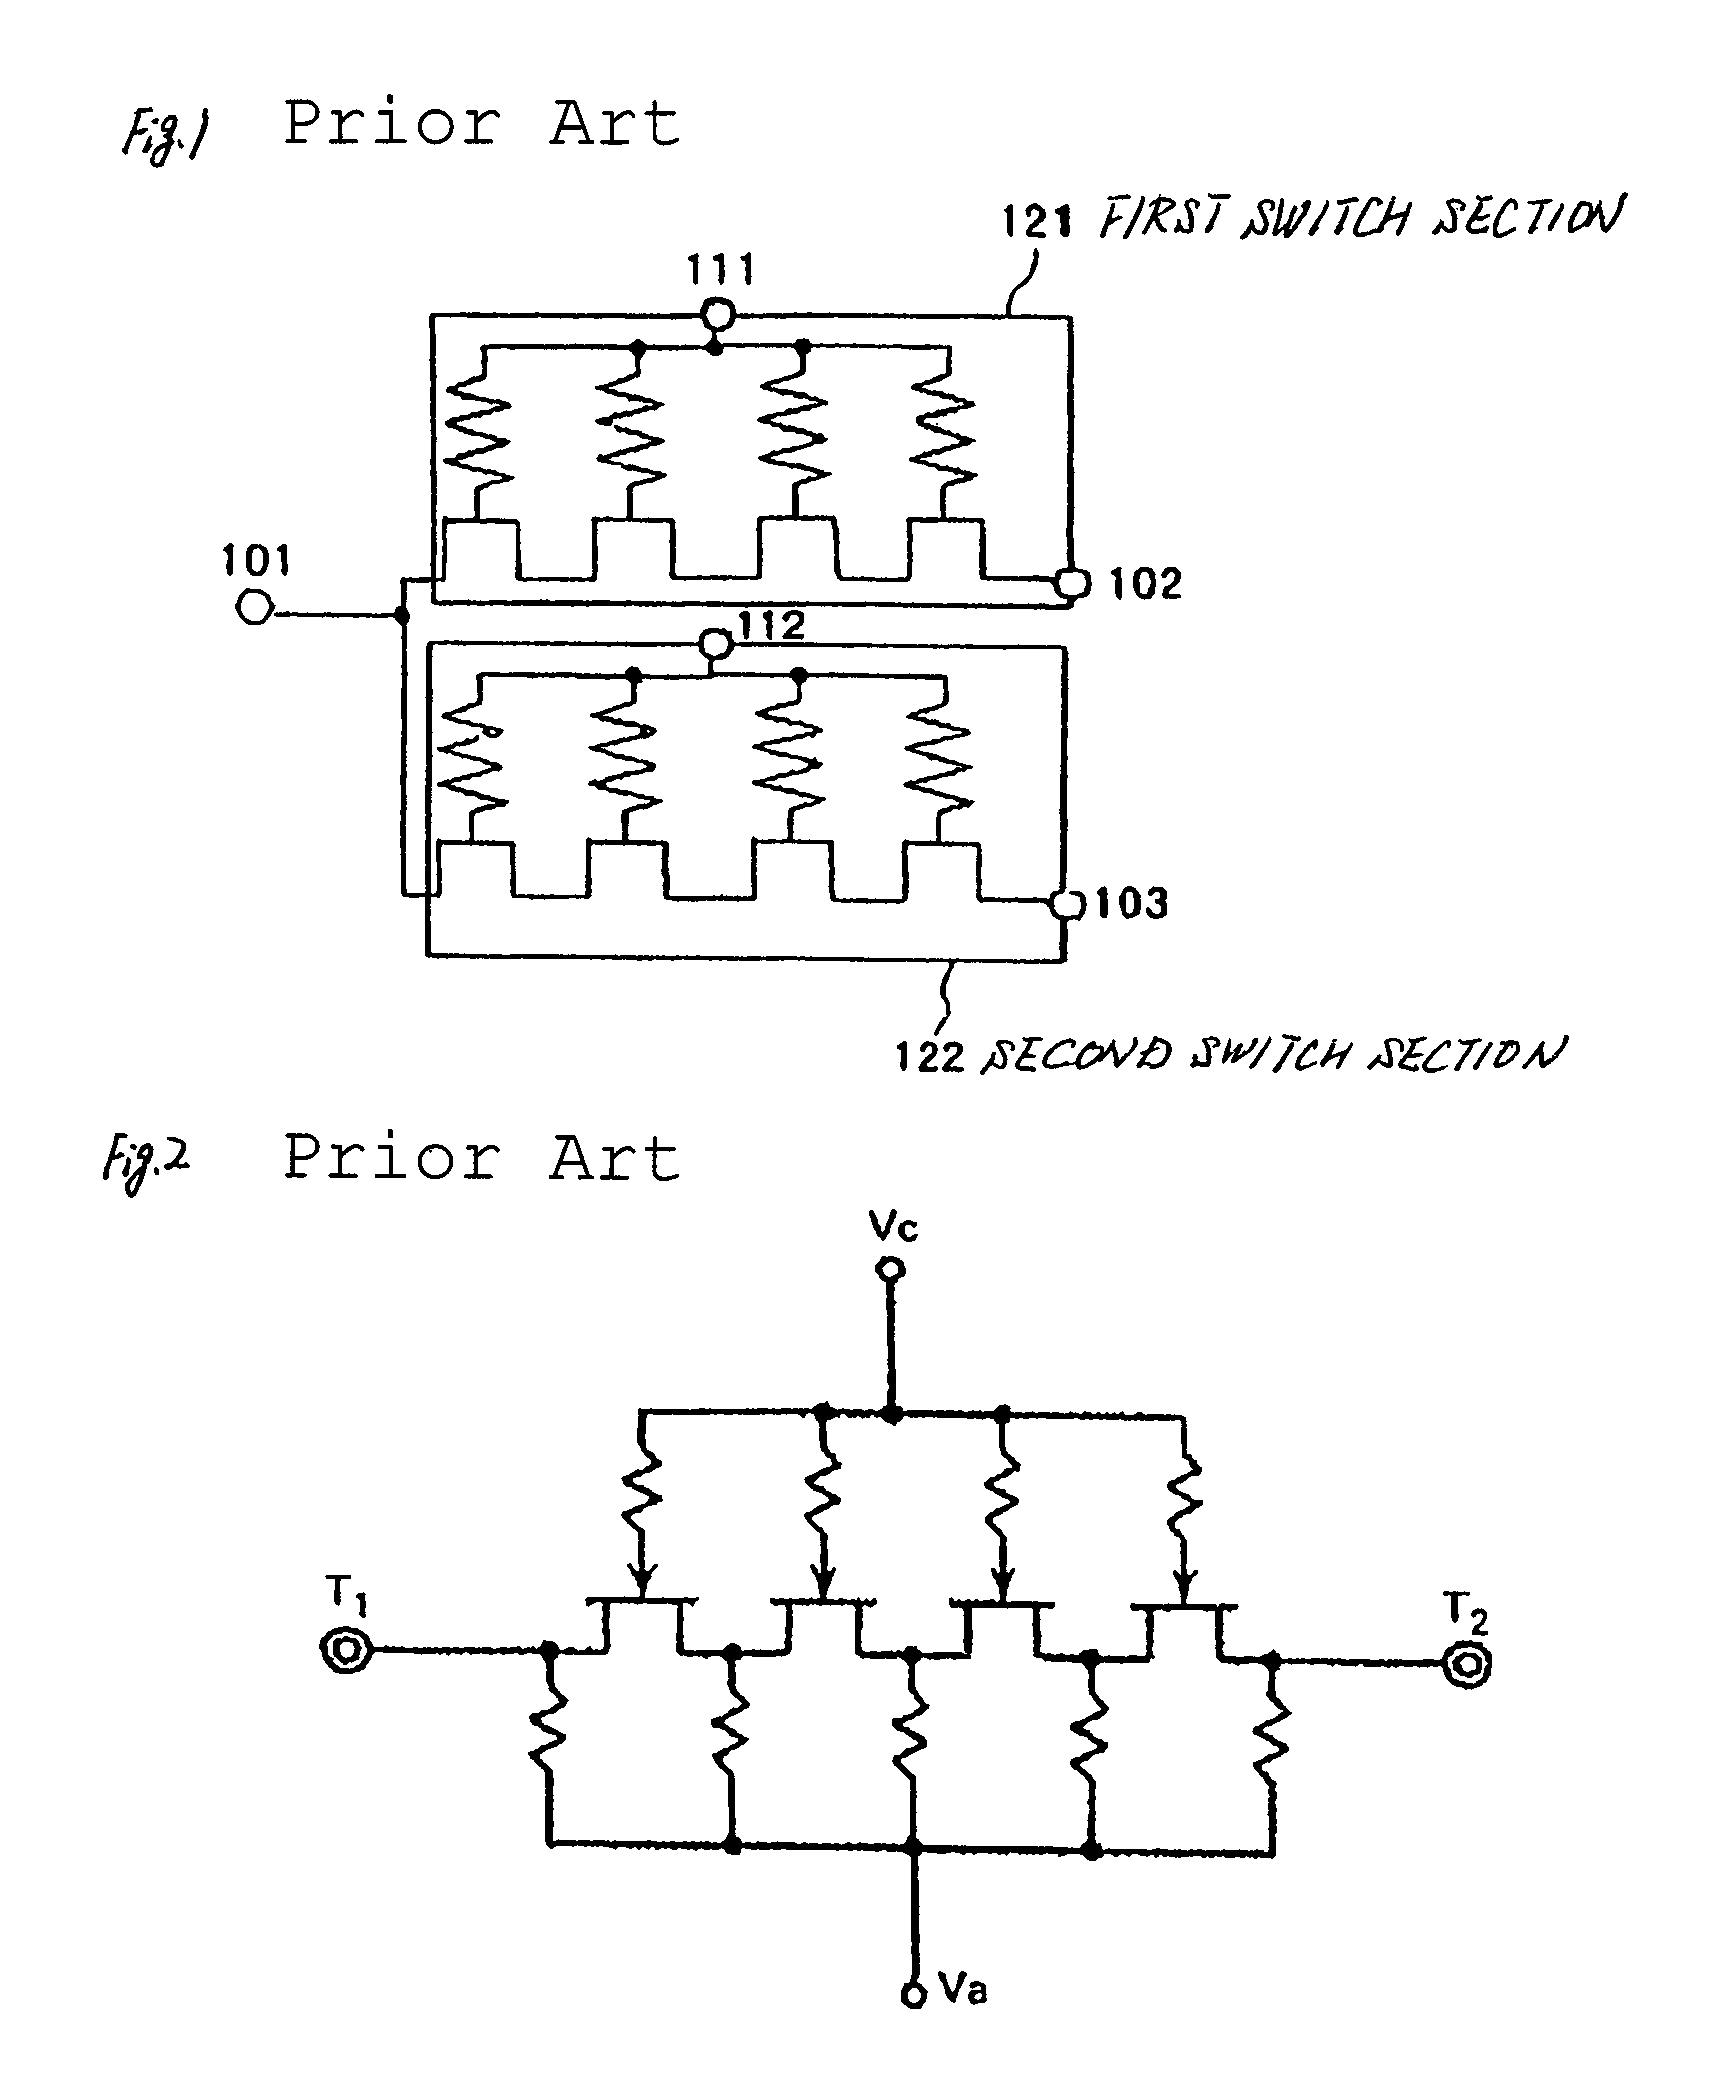 Switch circuit for high frequency signals wherein distortion of the signals are suppressed